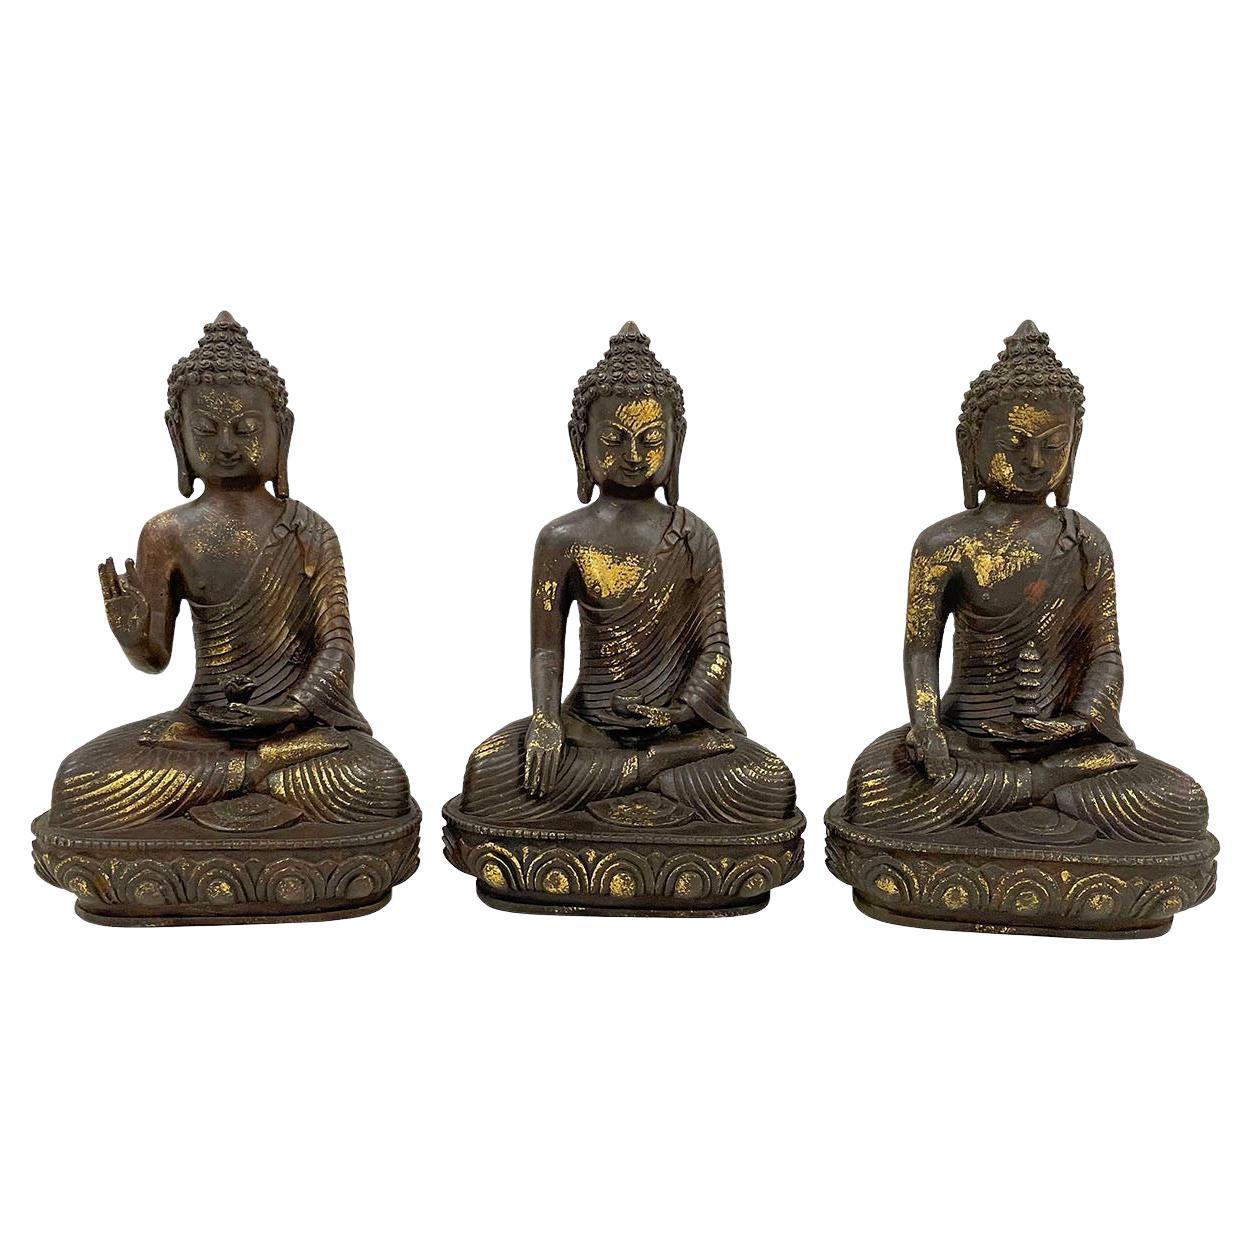 Early 20 Century Antique Carved Bronze 3 Generations of Buddha Statues